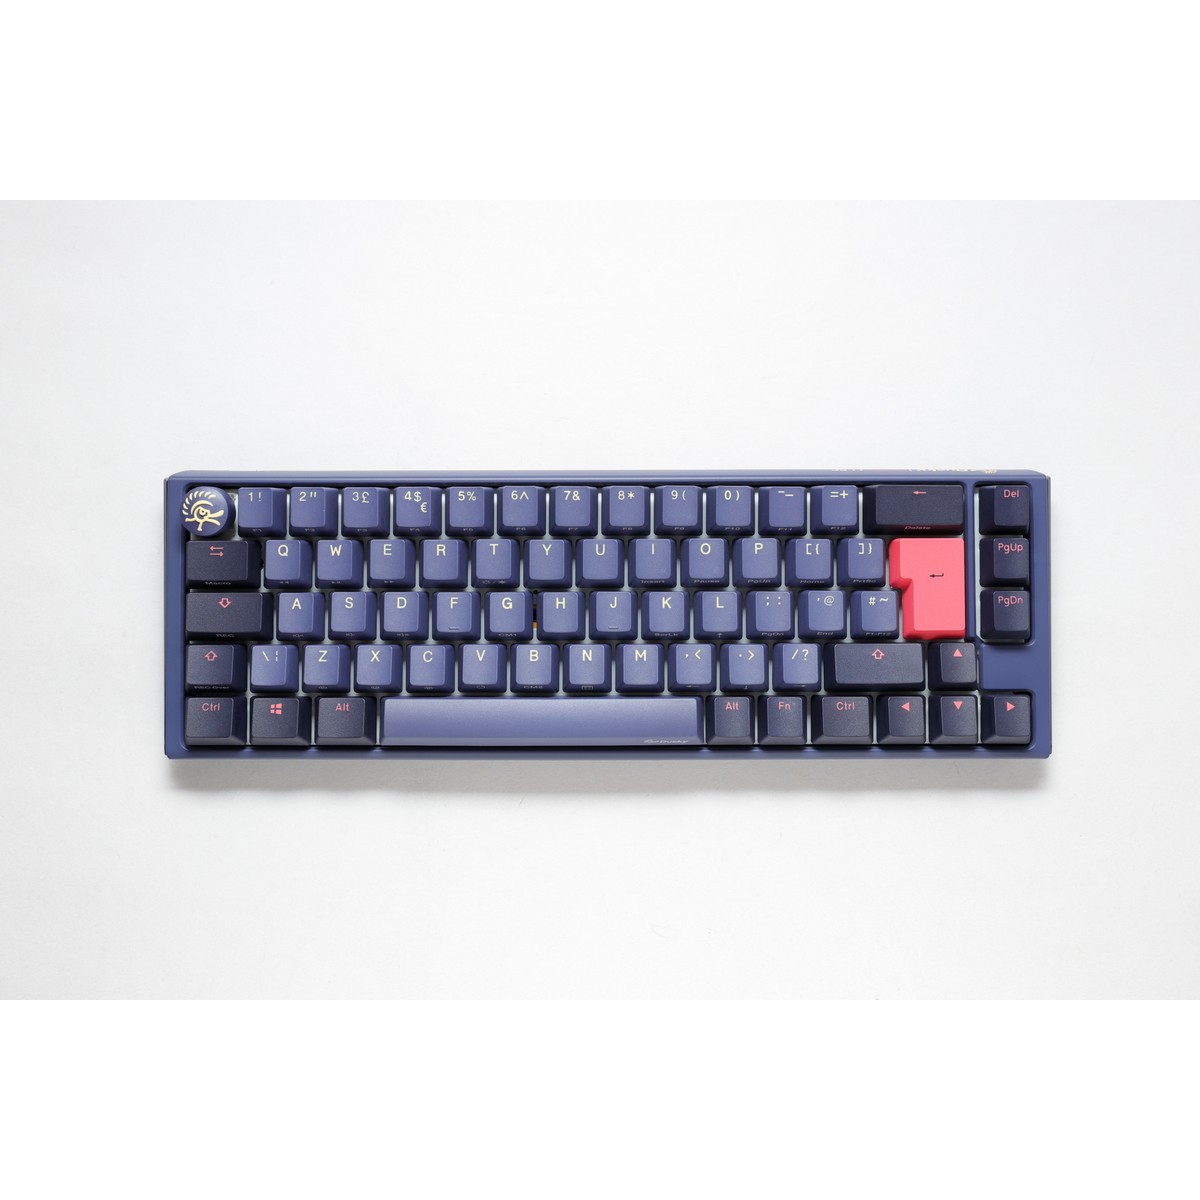 Ducky - Ducky One 3 Cosmic SF 65% USB RGB Mechanical Gaming Keyboard Cherry MX Red Switch - UK Layout